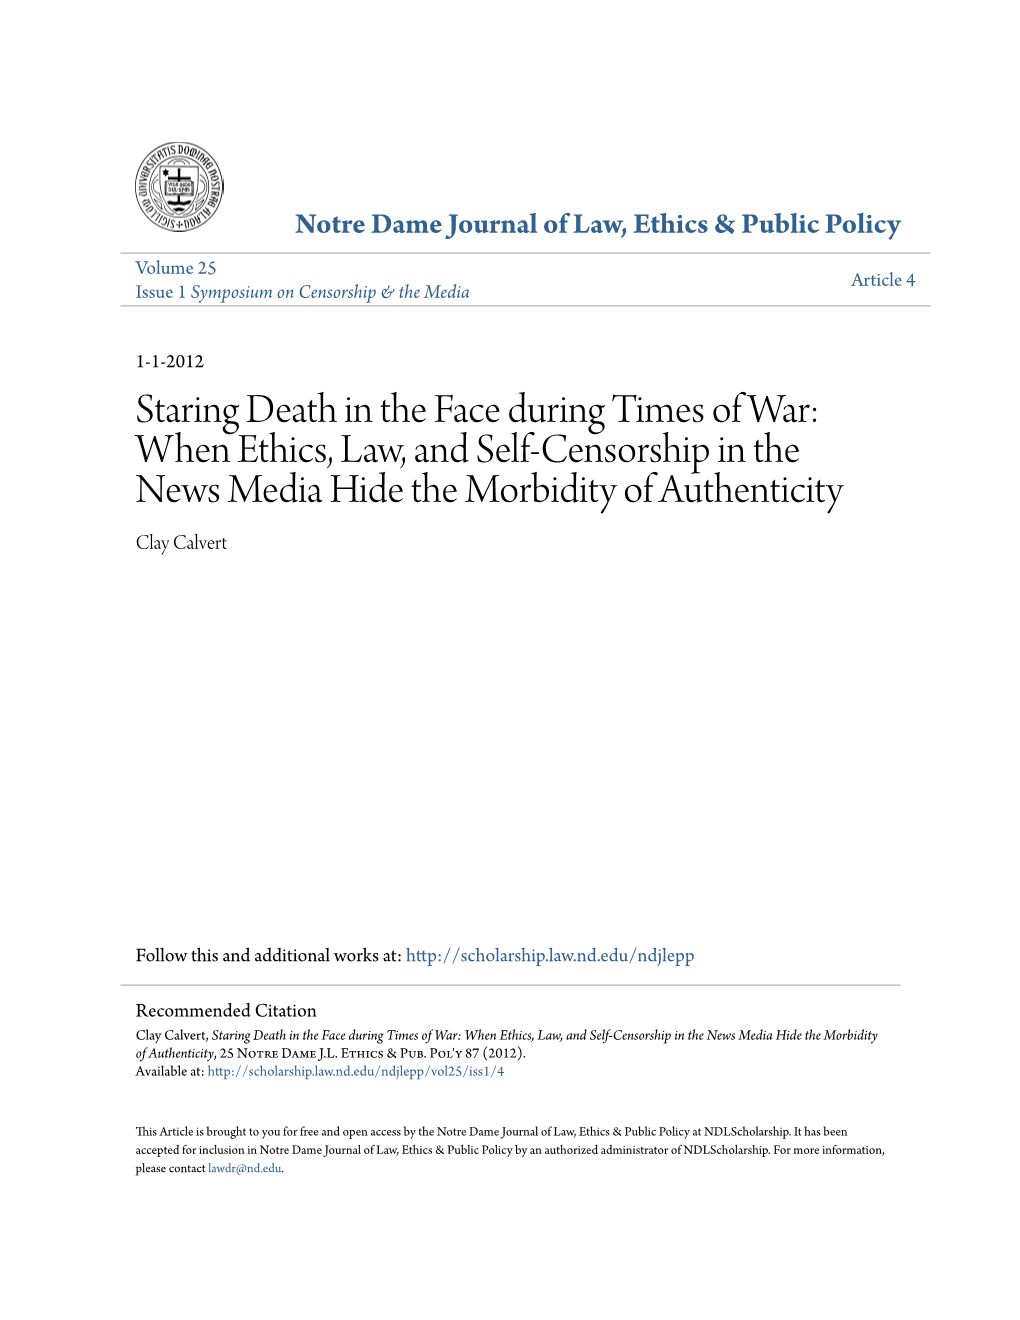 Staring Death in the Face During Times of War: When Ethics, Law, and Self-Censorship in the News Media Hide the Morbidity of Authenticity Clay Calvert